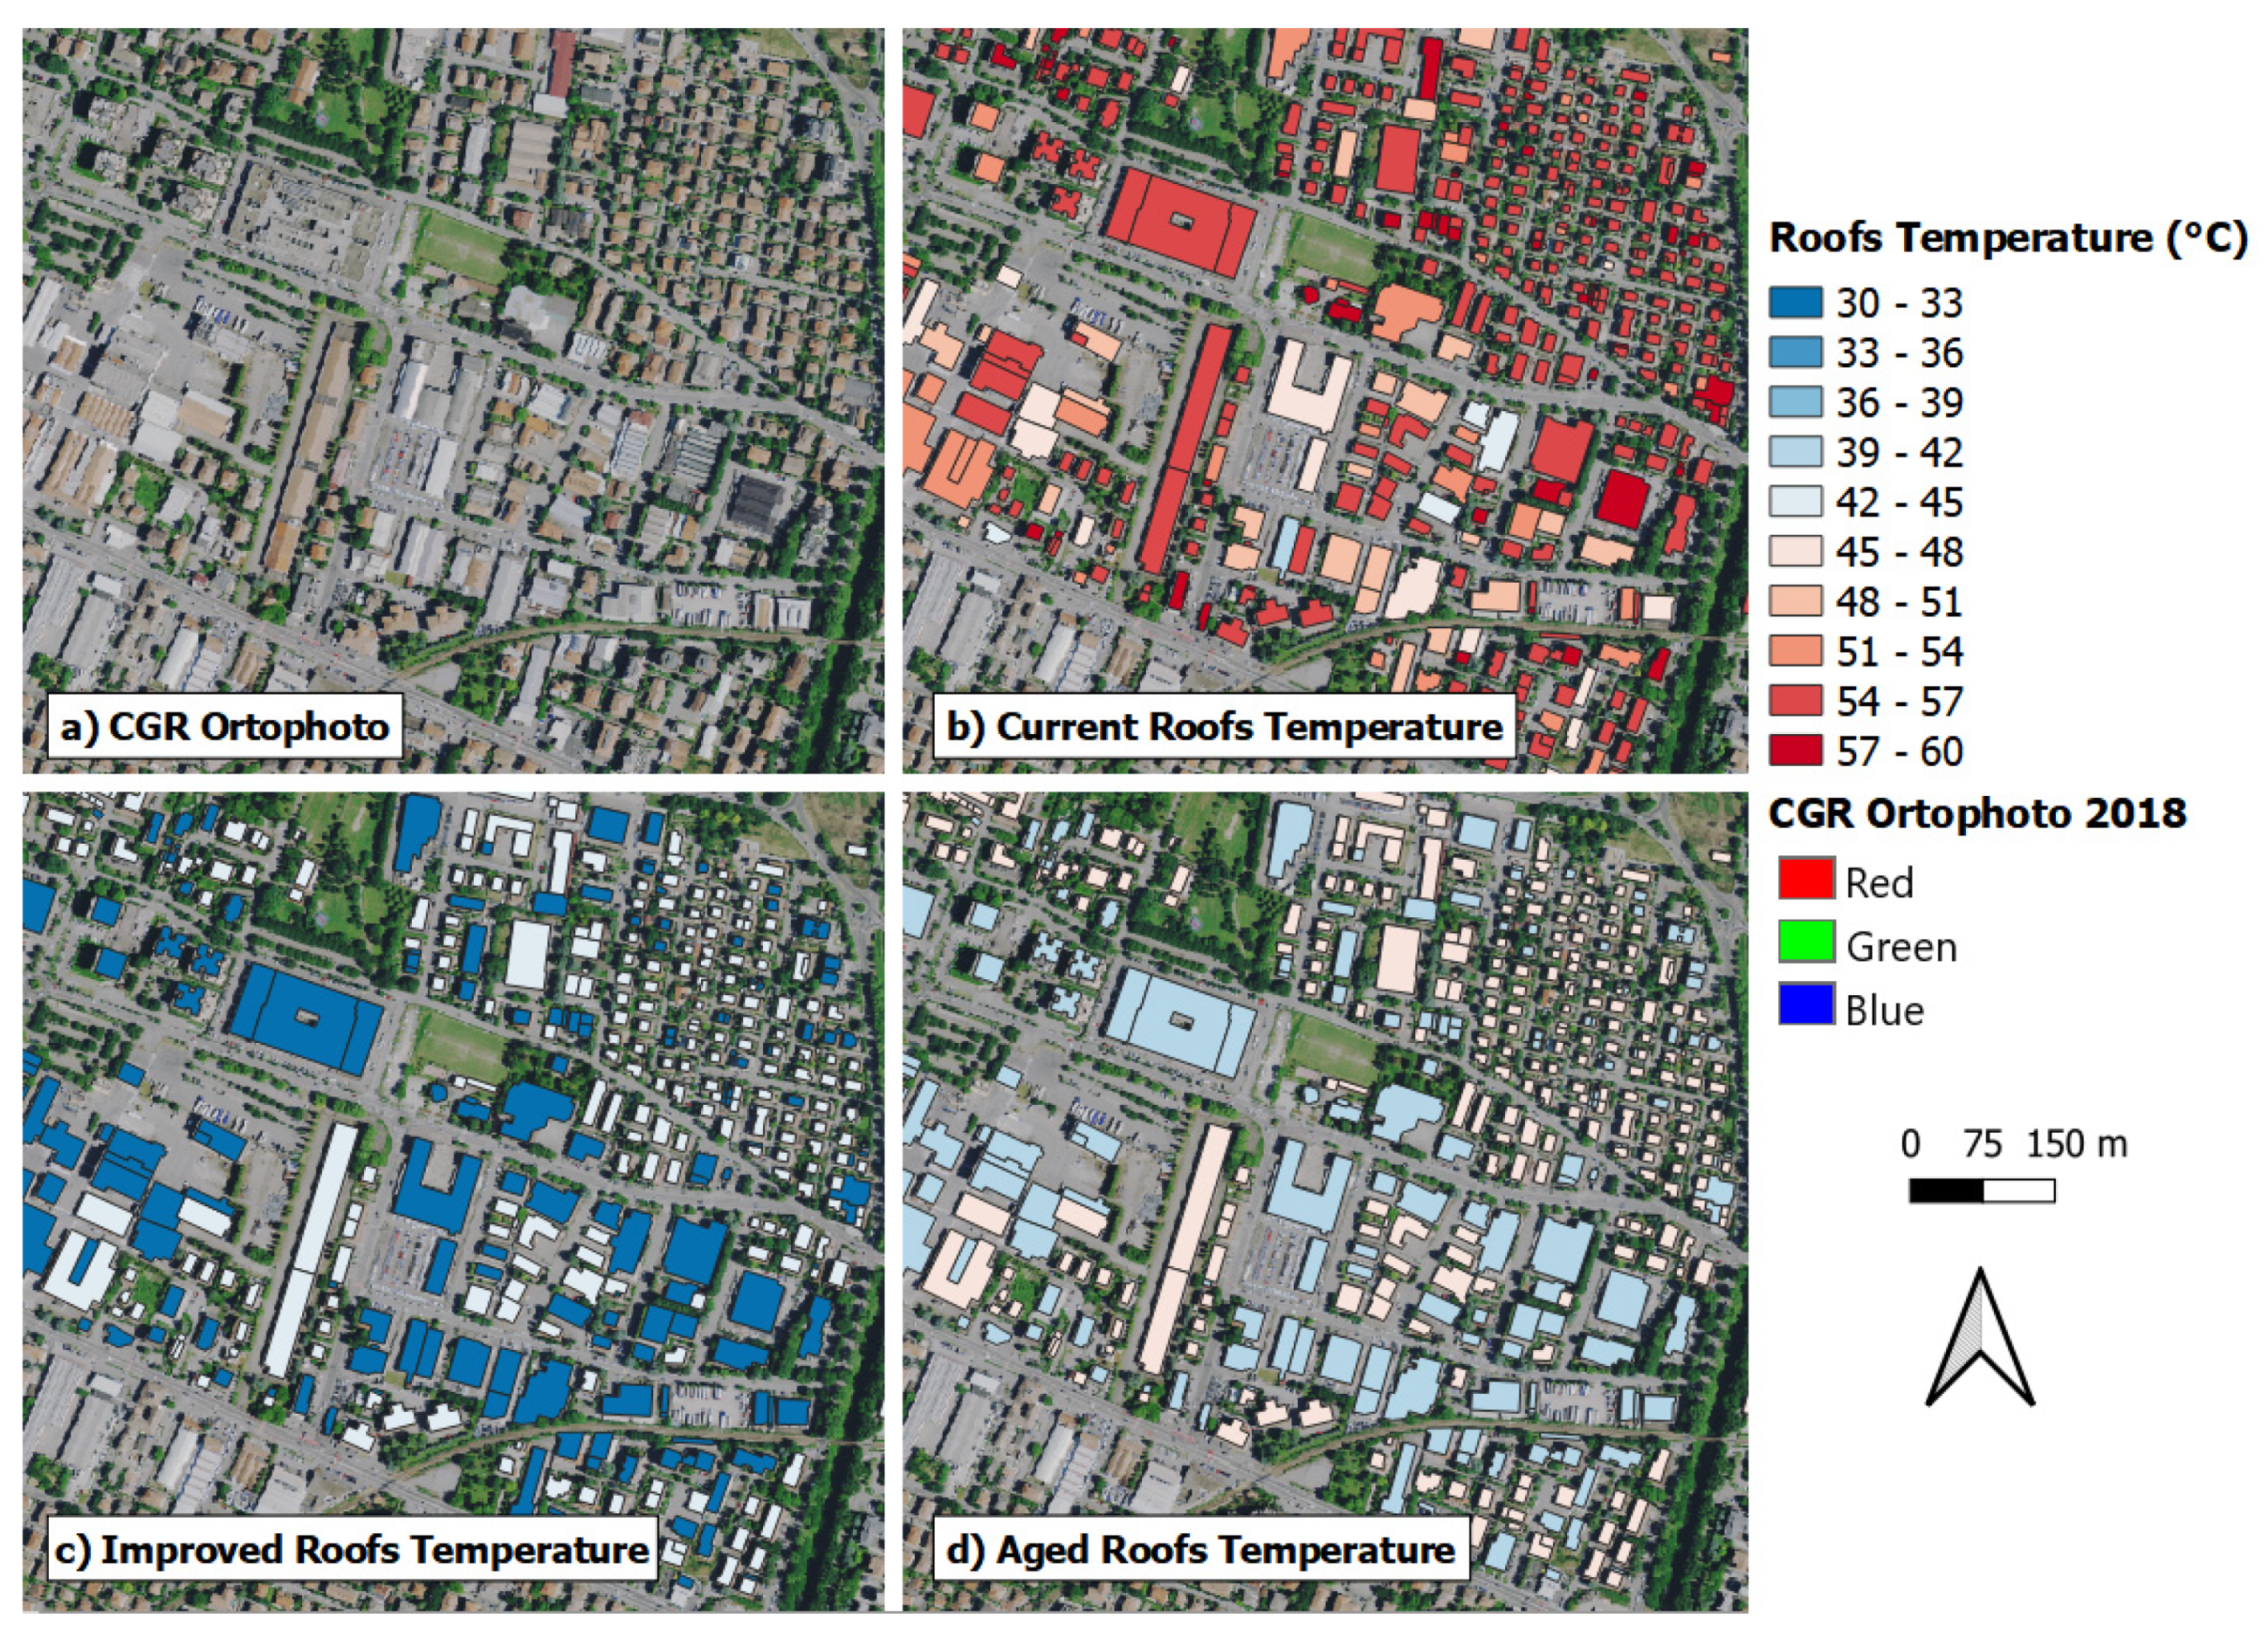 Bug Duplikering bevægelse Atmosphere | Free Full-Text | Identification of SUHI in Urban Areas by  Remote Sensing Data and Mitigation Hypothesis through Solar Reflective  Materials | HTML